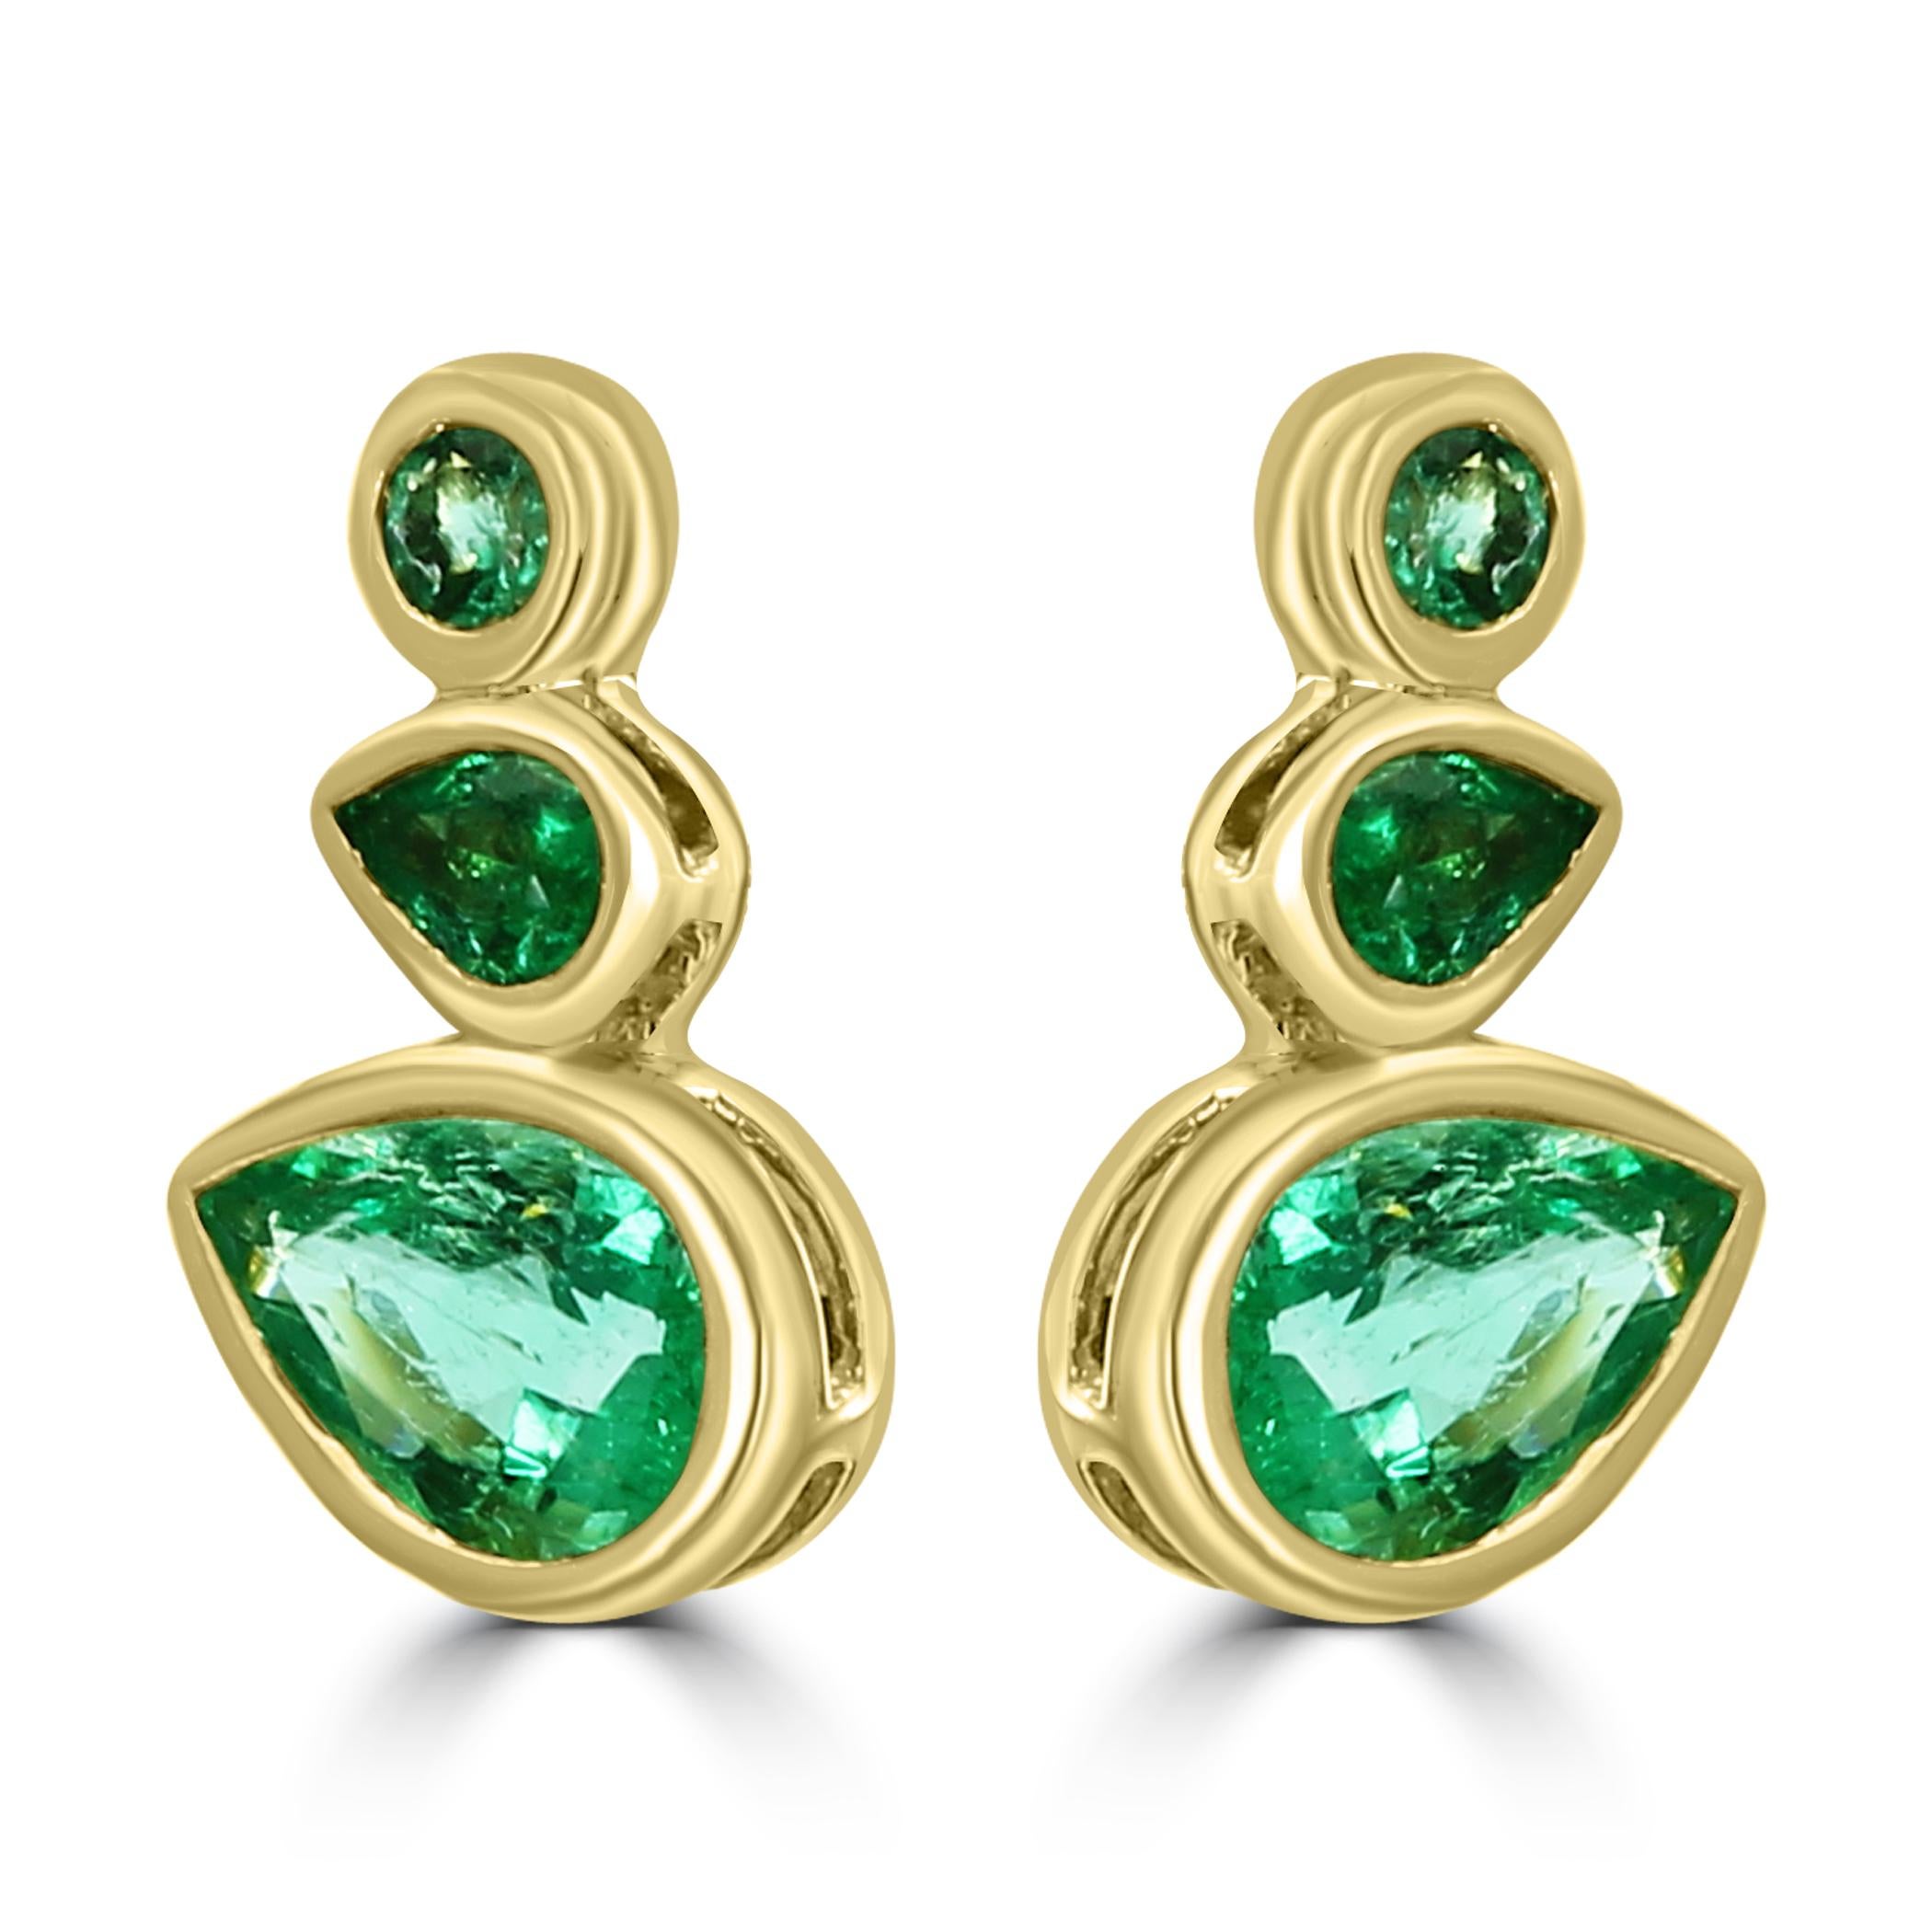 Feel the power & beauty of nature with our Muzo-Emerald bezel-set earrings. The term Muzo is used for these Emeralds since their found in the Muzo mine in Bogota, Colombia. These earrings feature four captivating Muzo-Emerald Pears, weighing a total